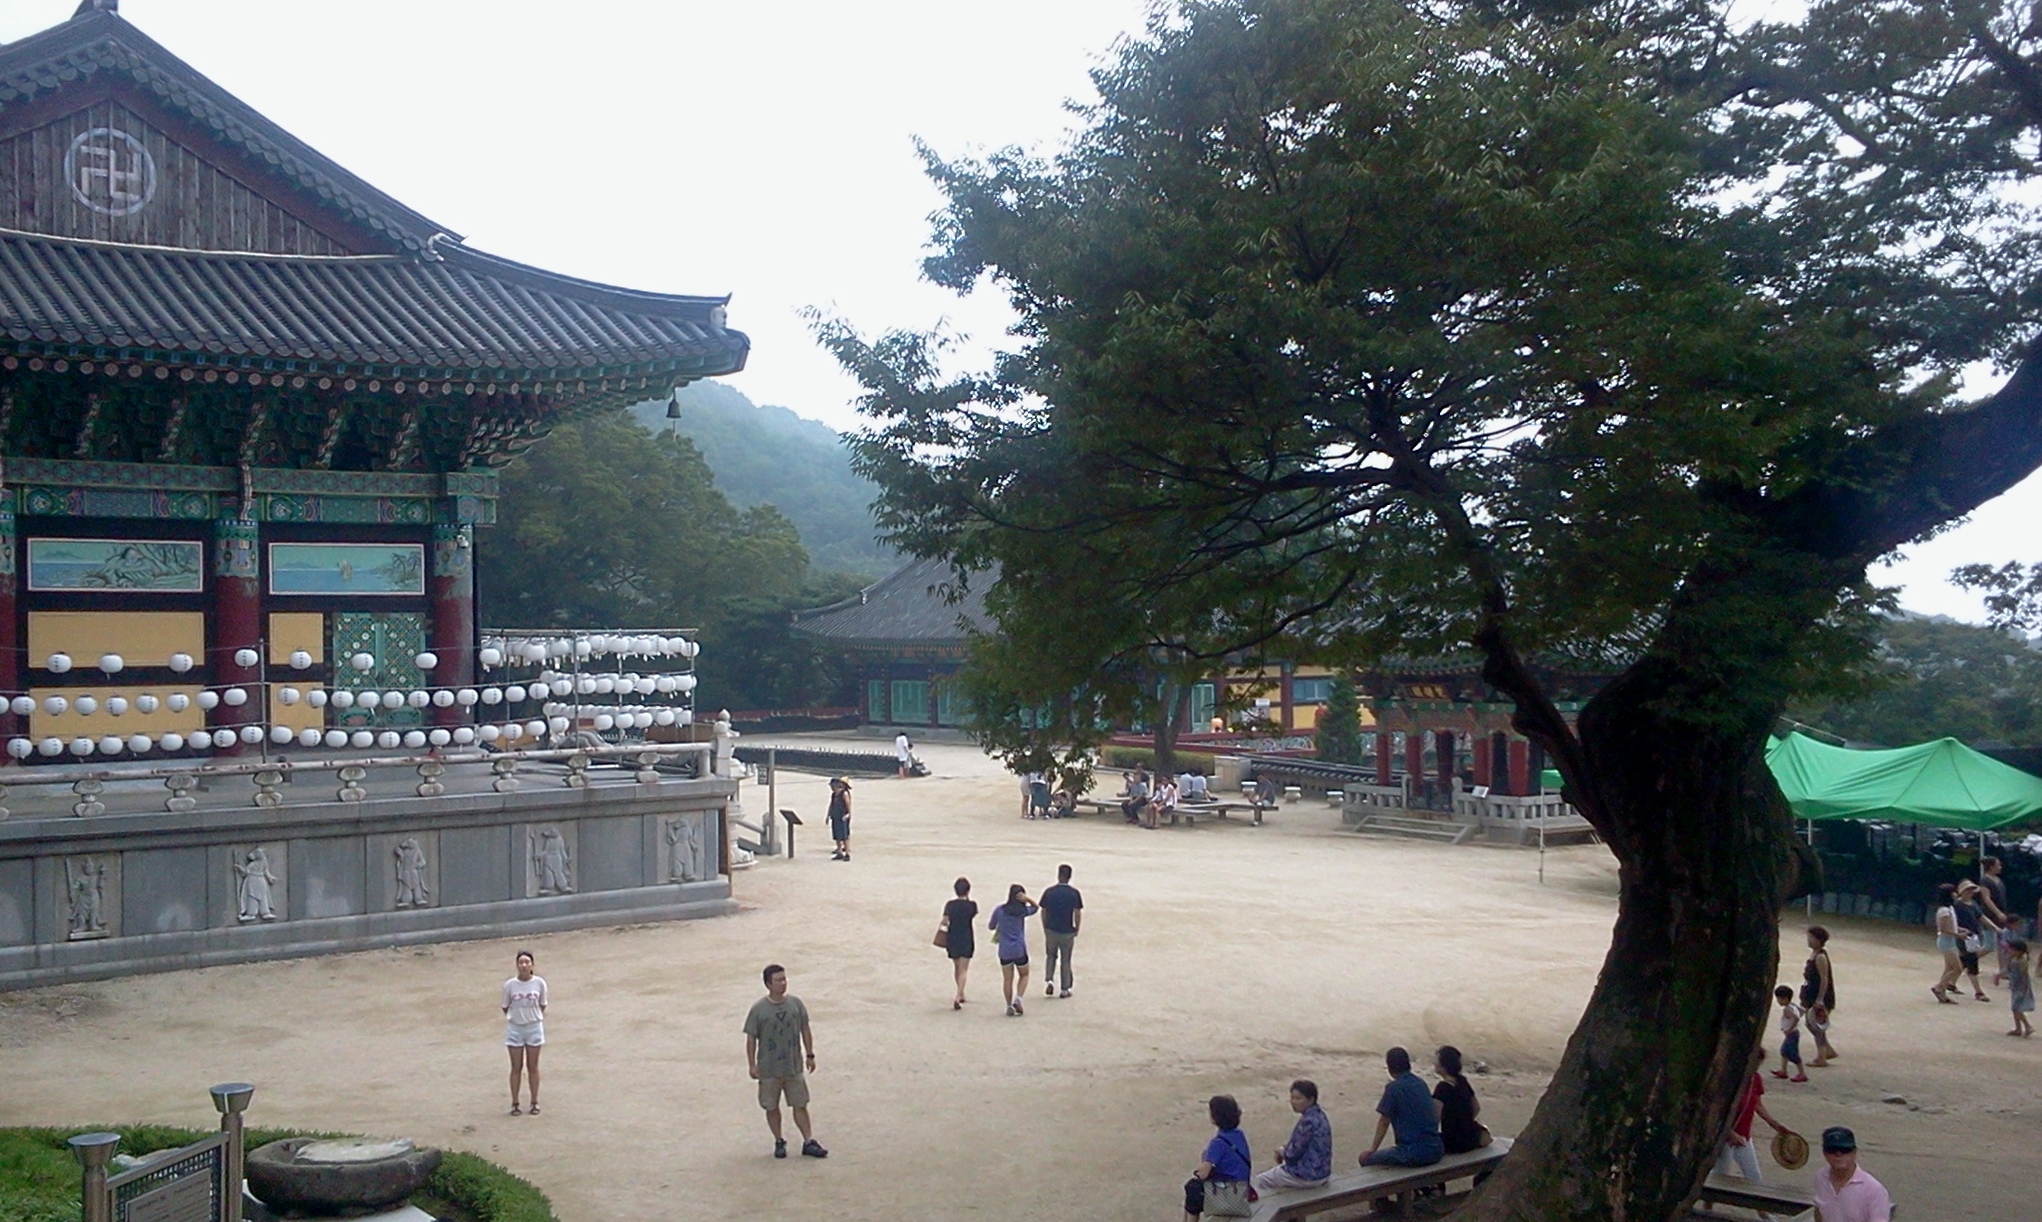 A large, twisted tree in a Buddhist temple courtyard, seen from higher vantage point, on the right, with people (tourists) standing around and several temple buildings nearby, the largest cut by the frame on the left